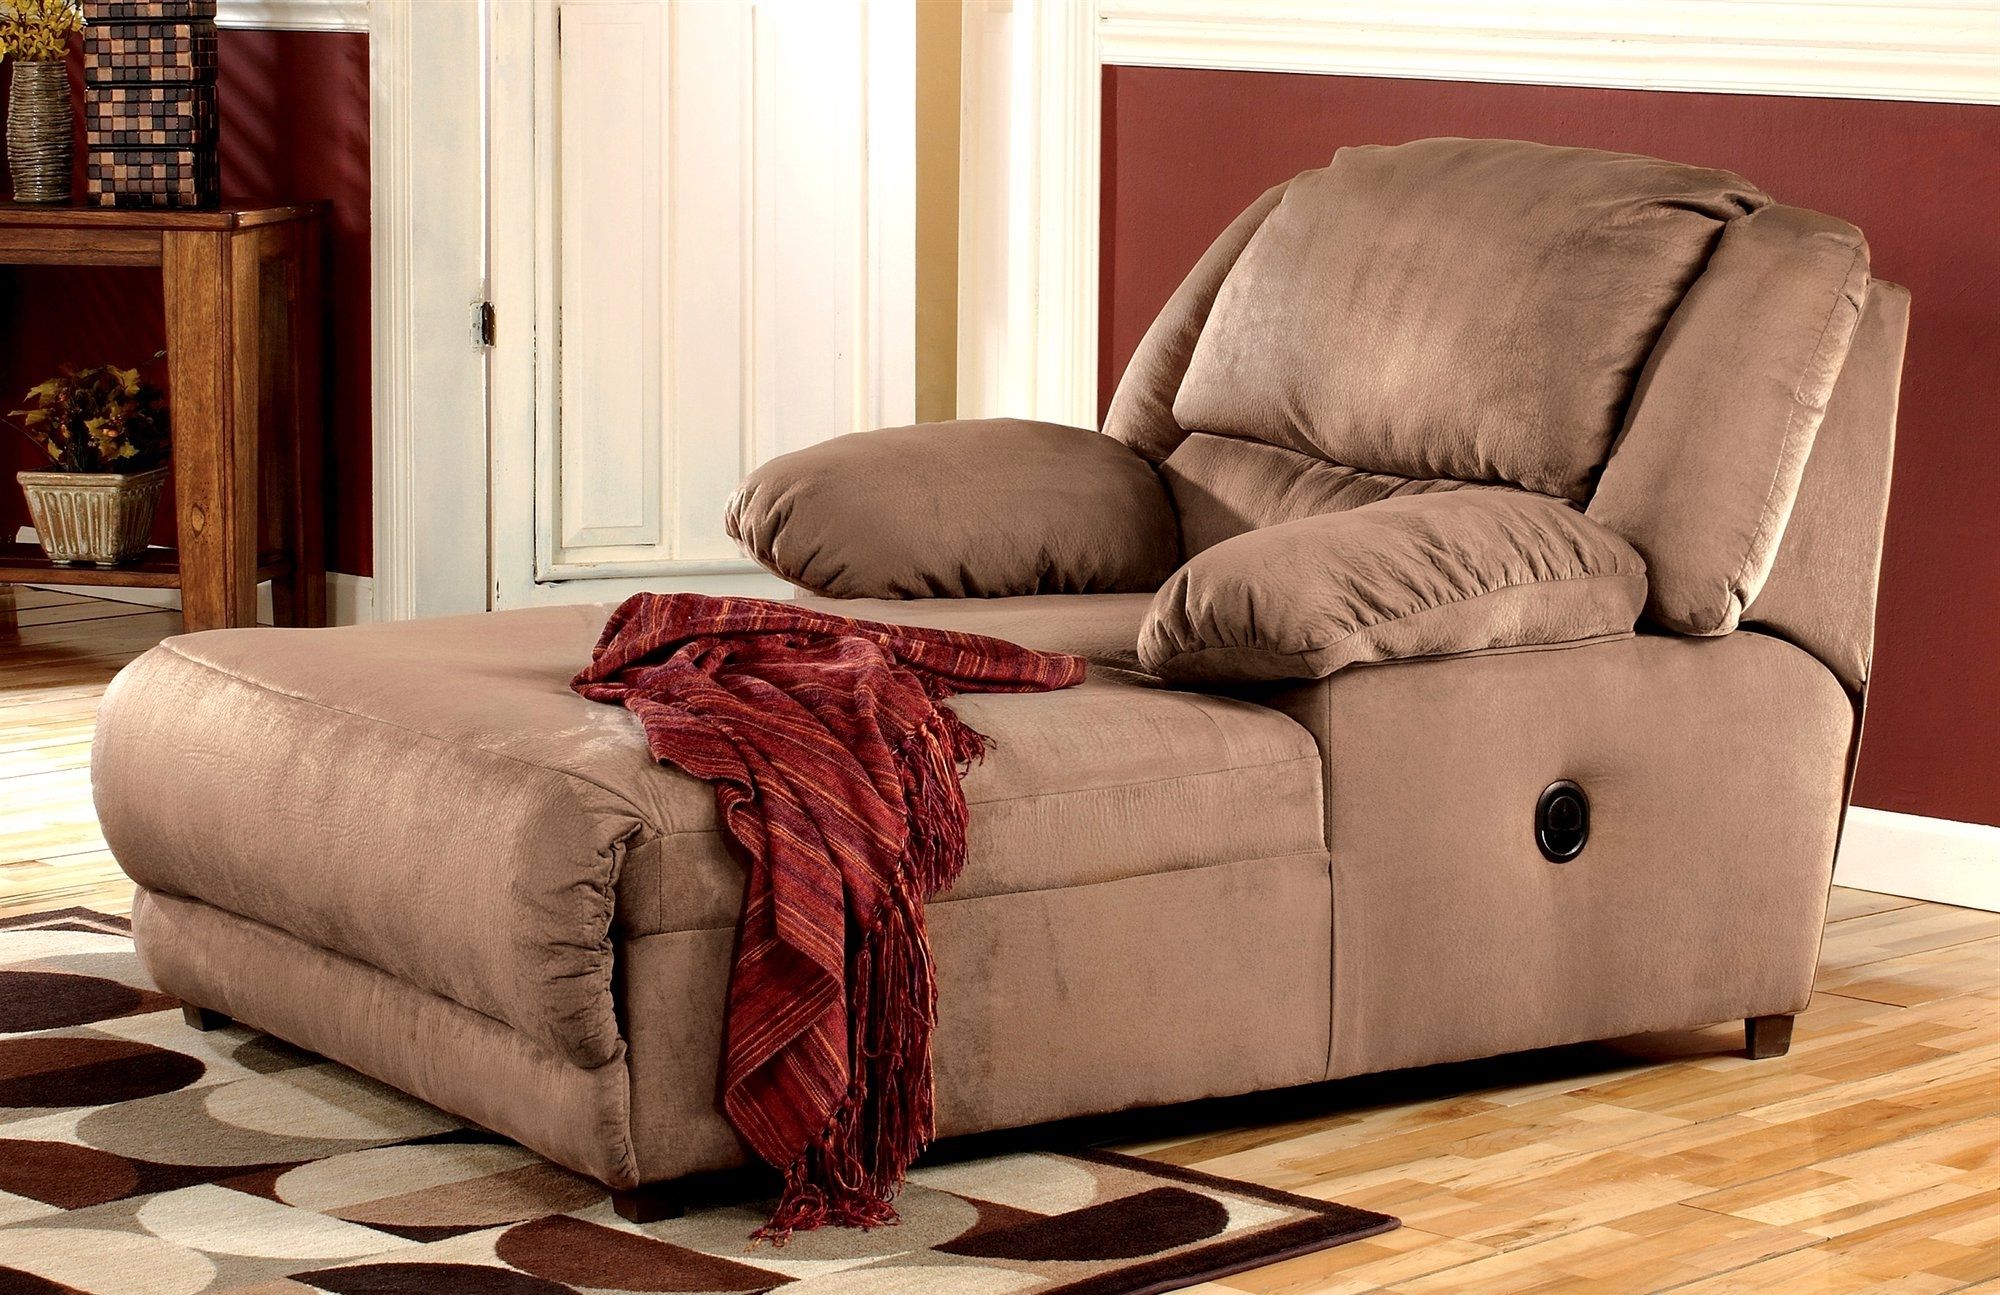 Deal On Living Room Chaise Lounge Chairs